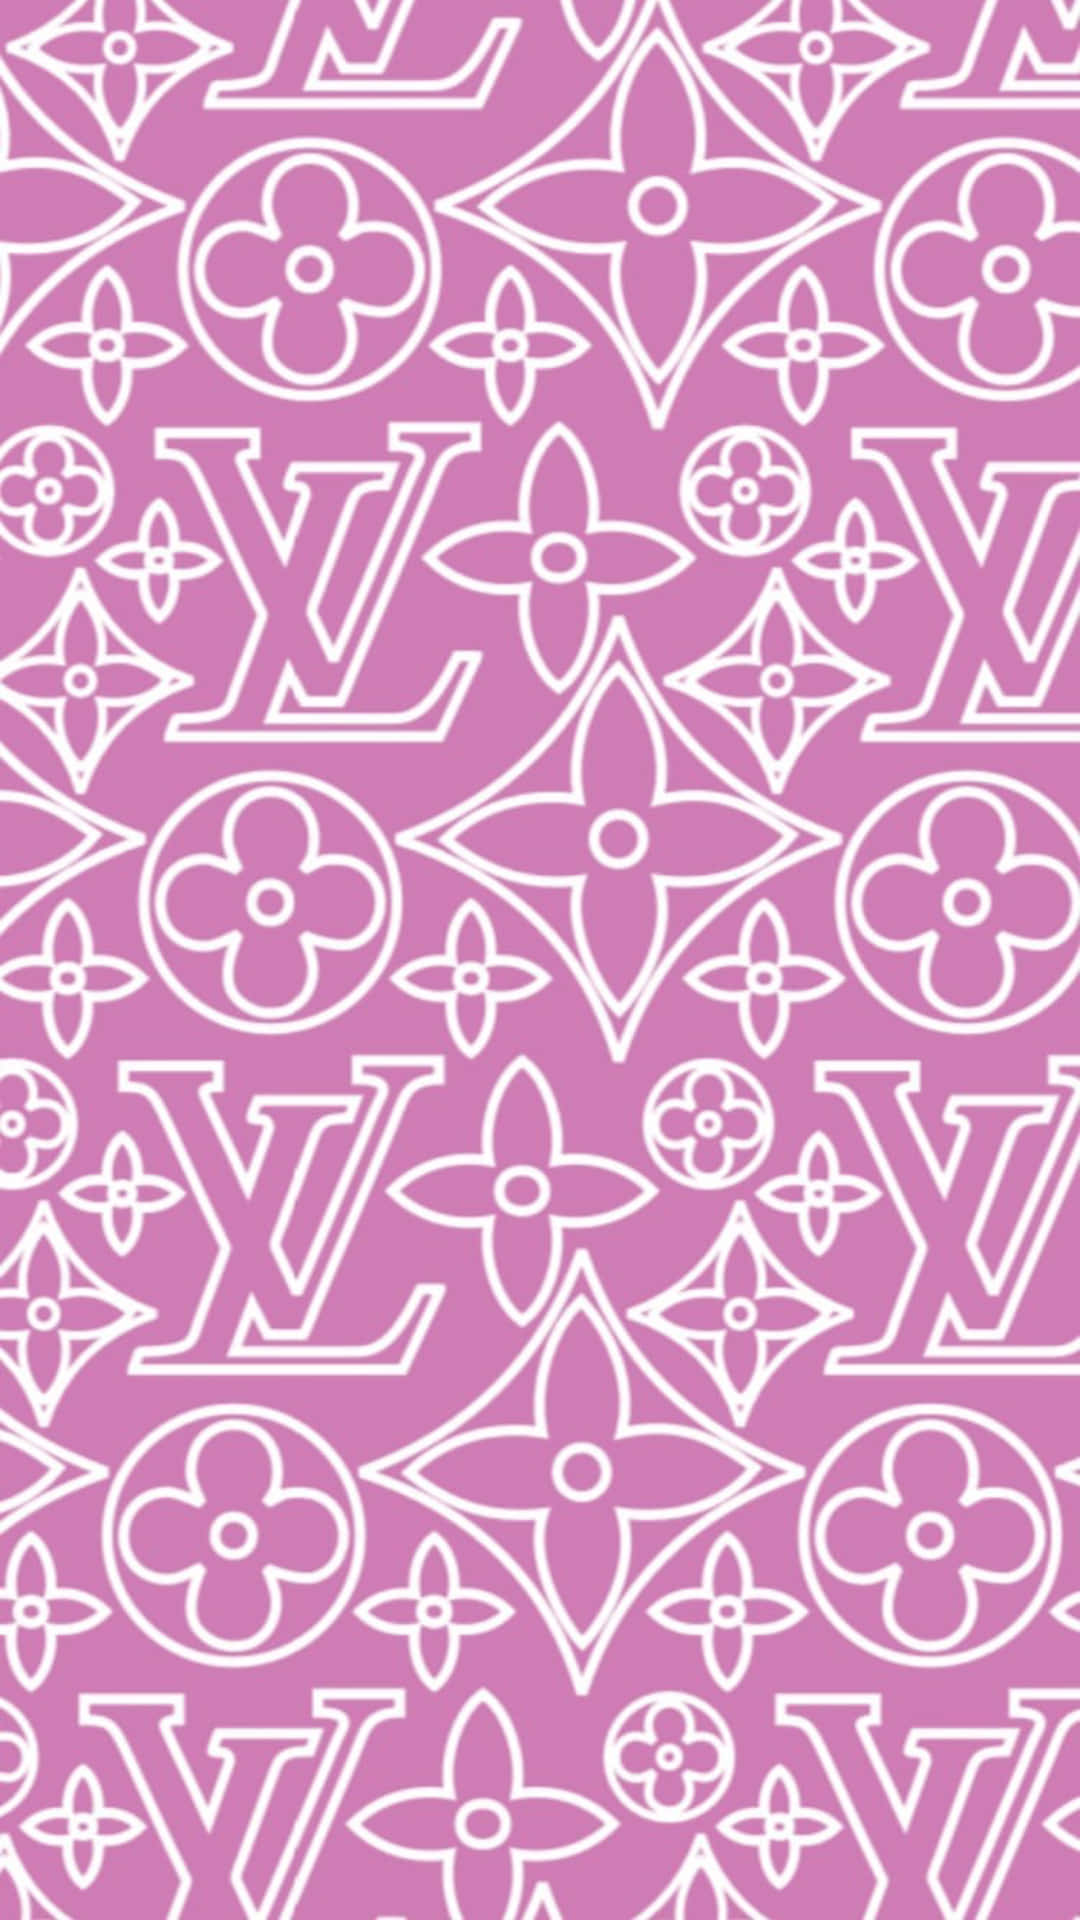 Pink Louis Vuitton wallpaper by Jay2slimy - Download on ZEDGE™